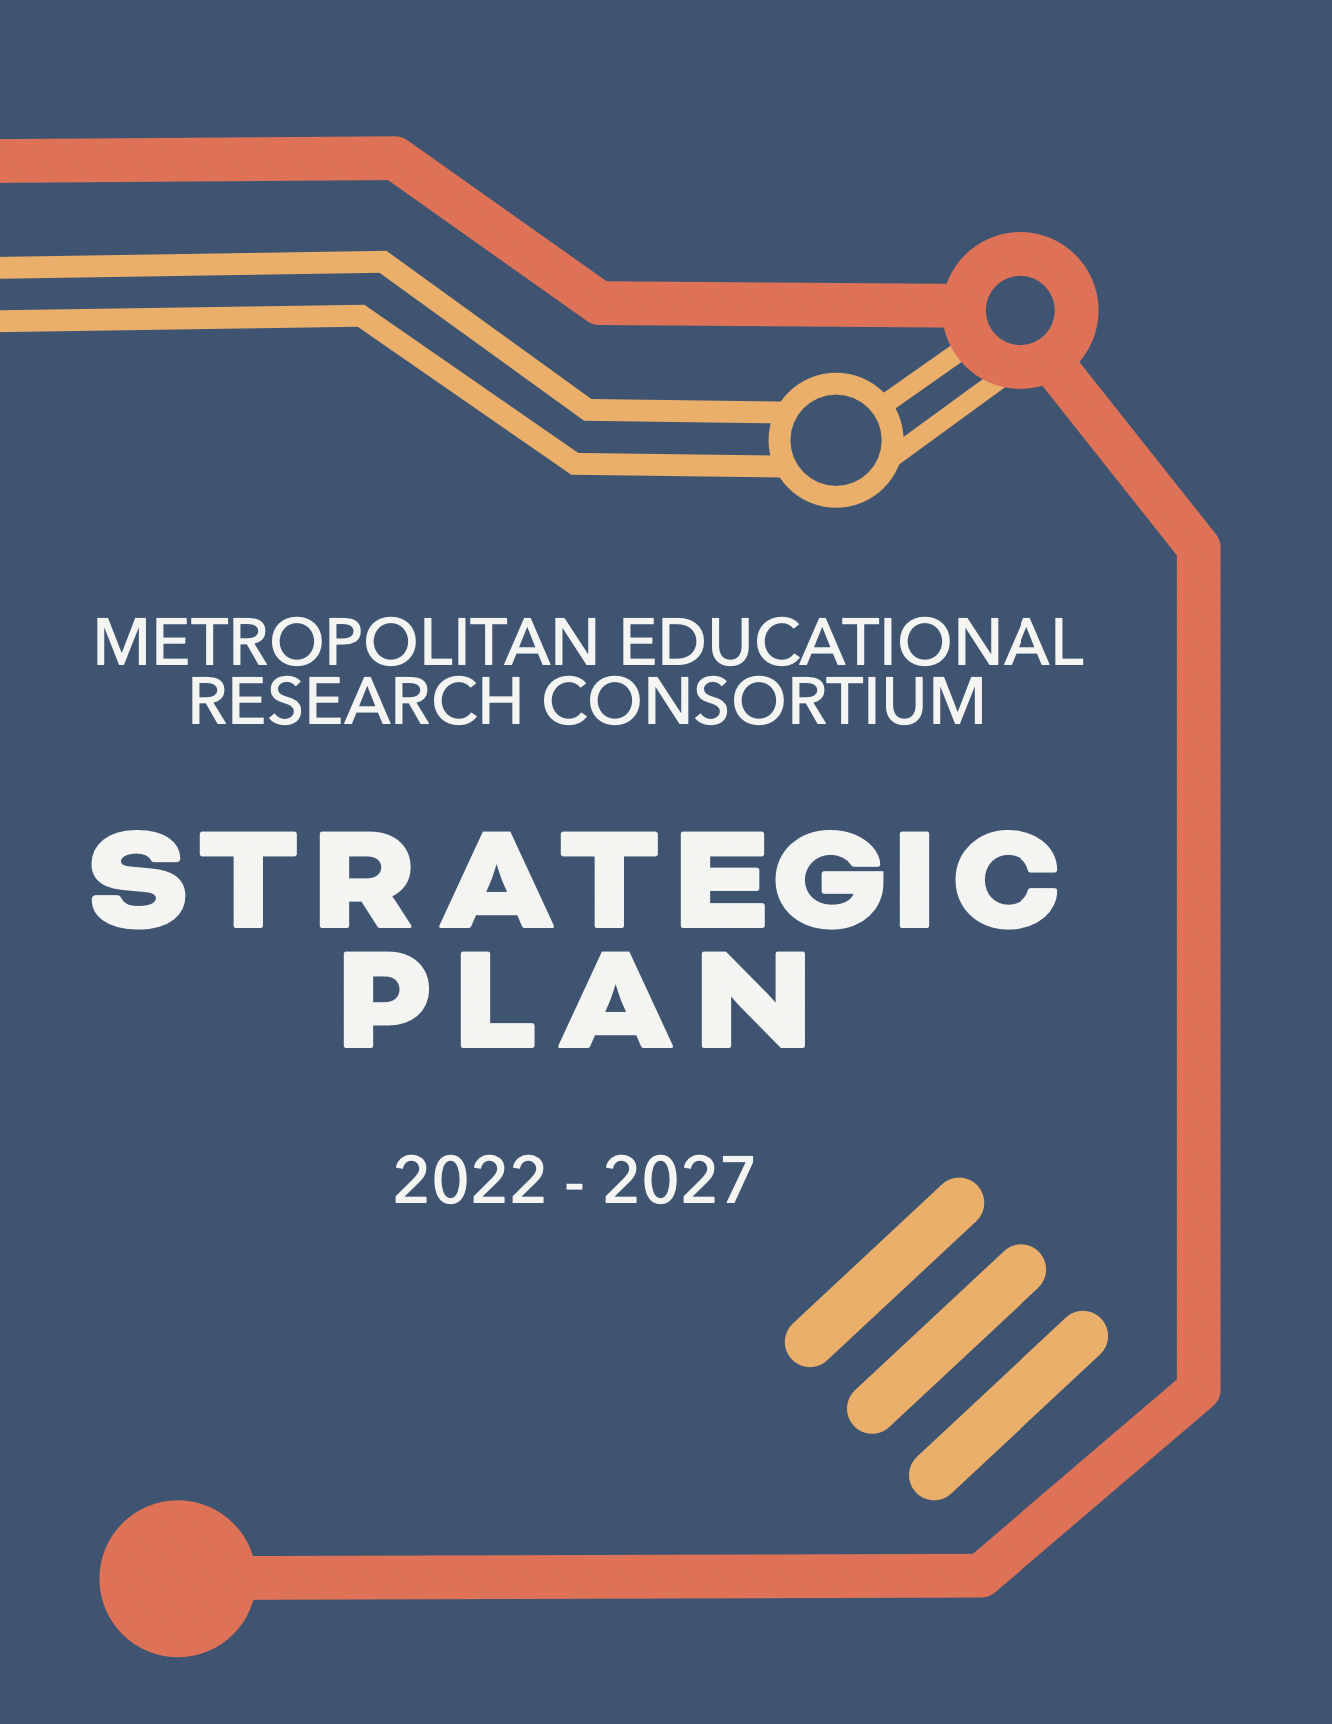 The cover of the 2022-2027 MERC Strategic Plan